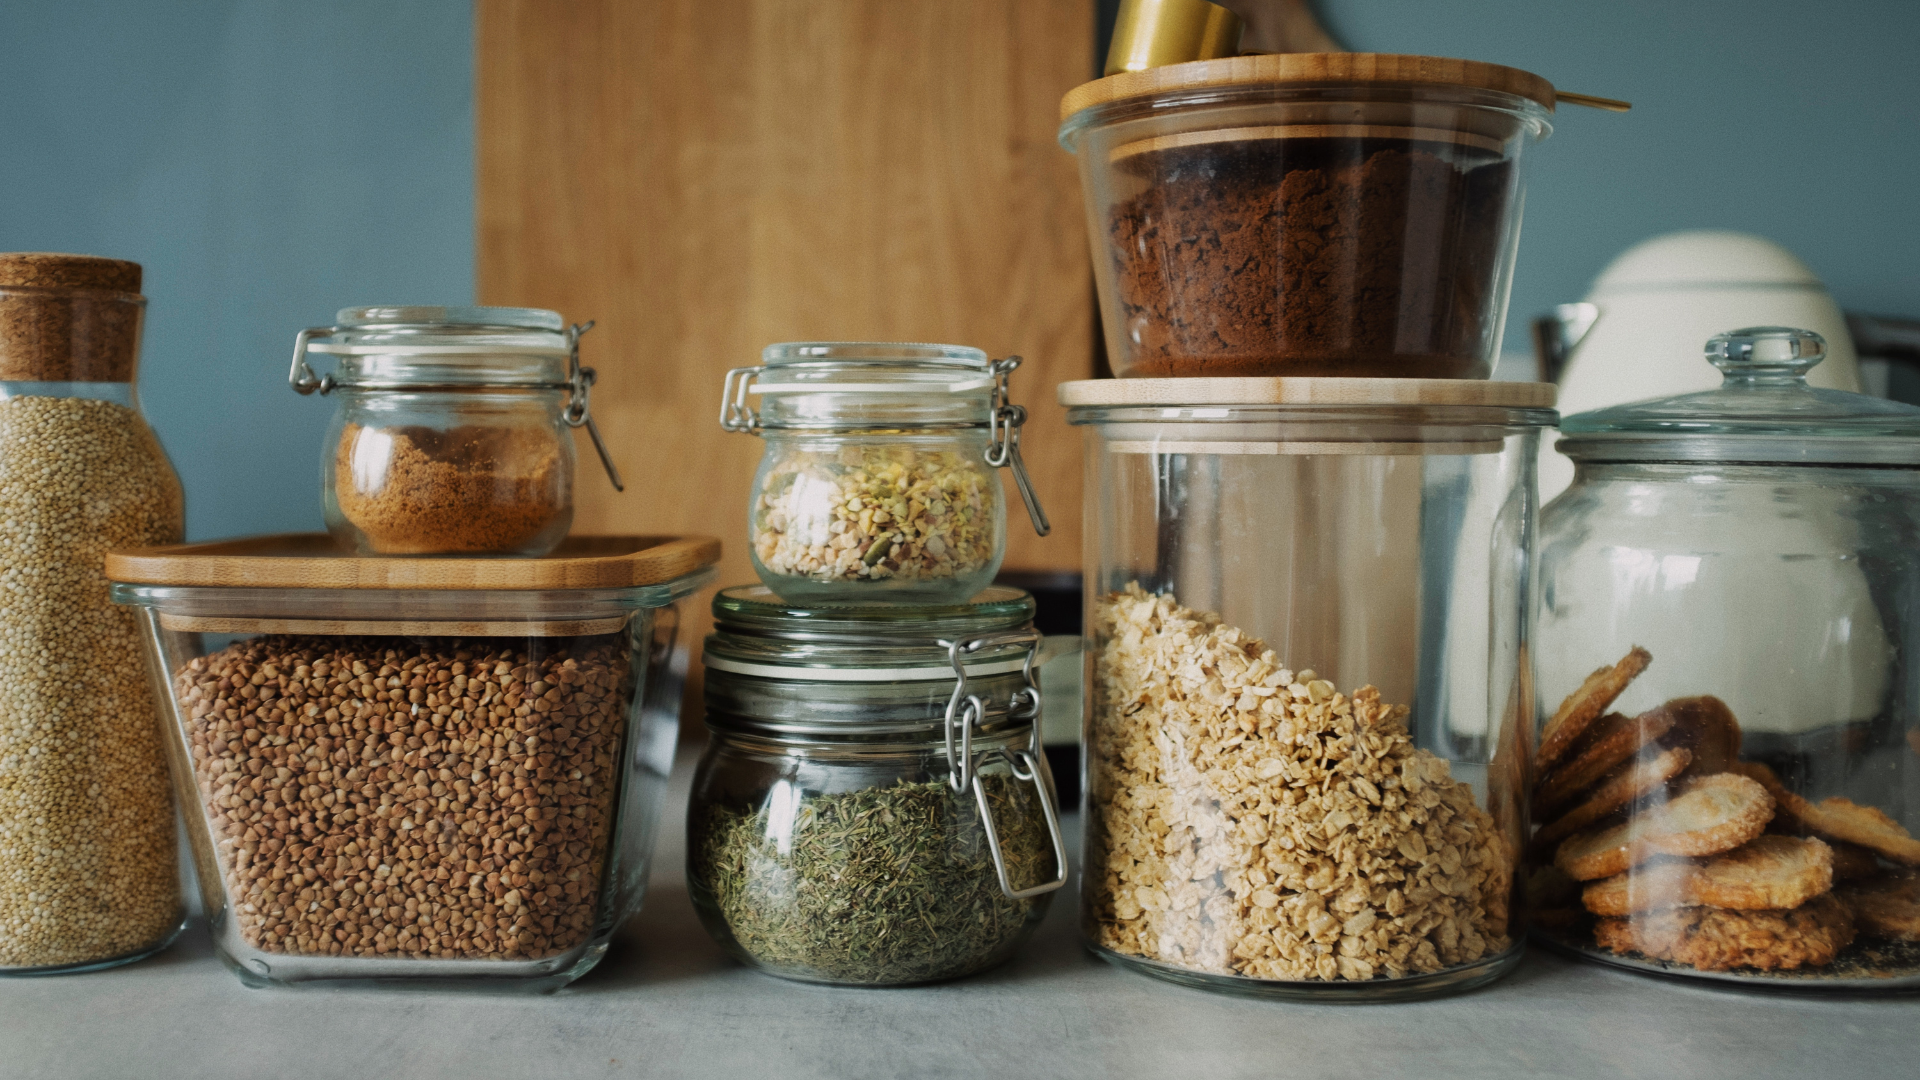 Clear glass jars with brown grains on kitchen countertop